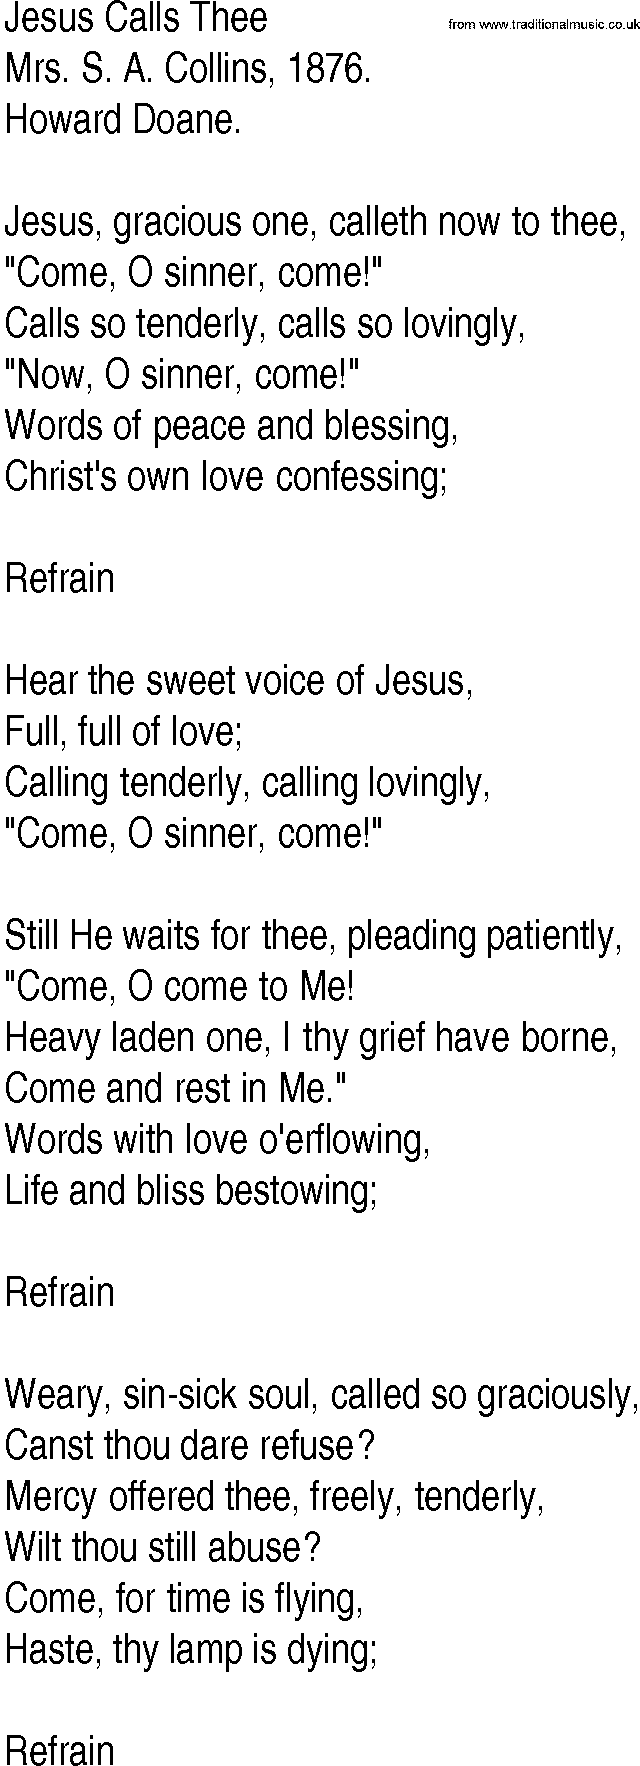 Hymn and Gospel Song: Jesus Calls Thee by Mrs S A Collins lyrics